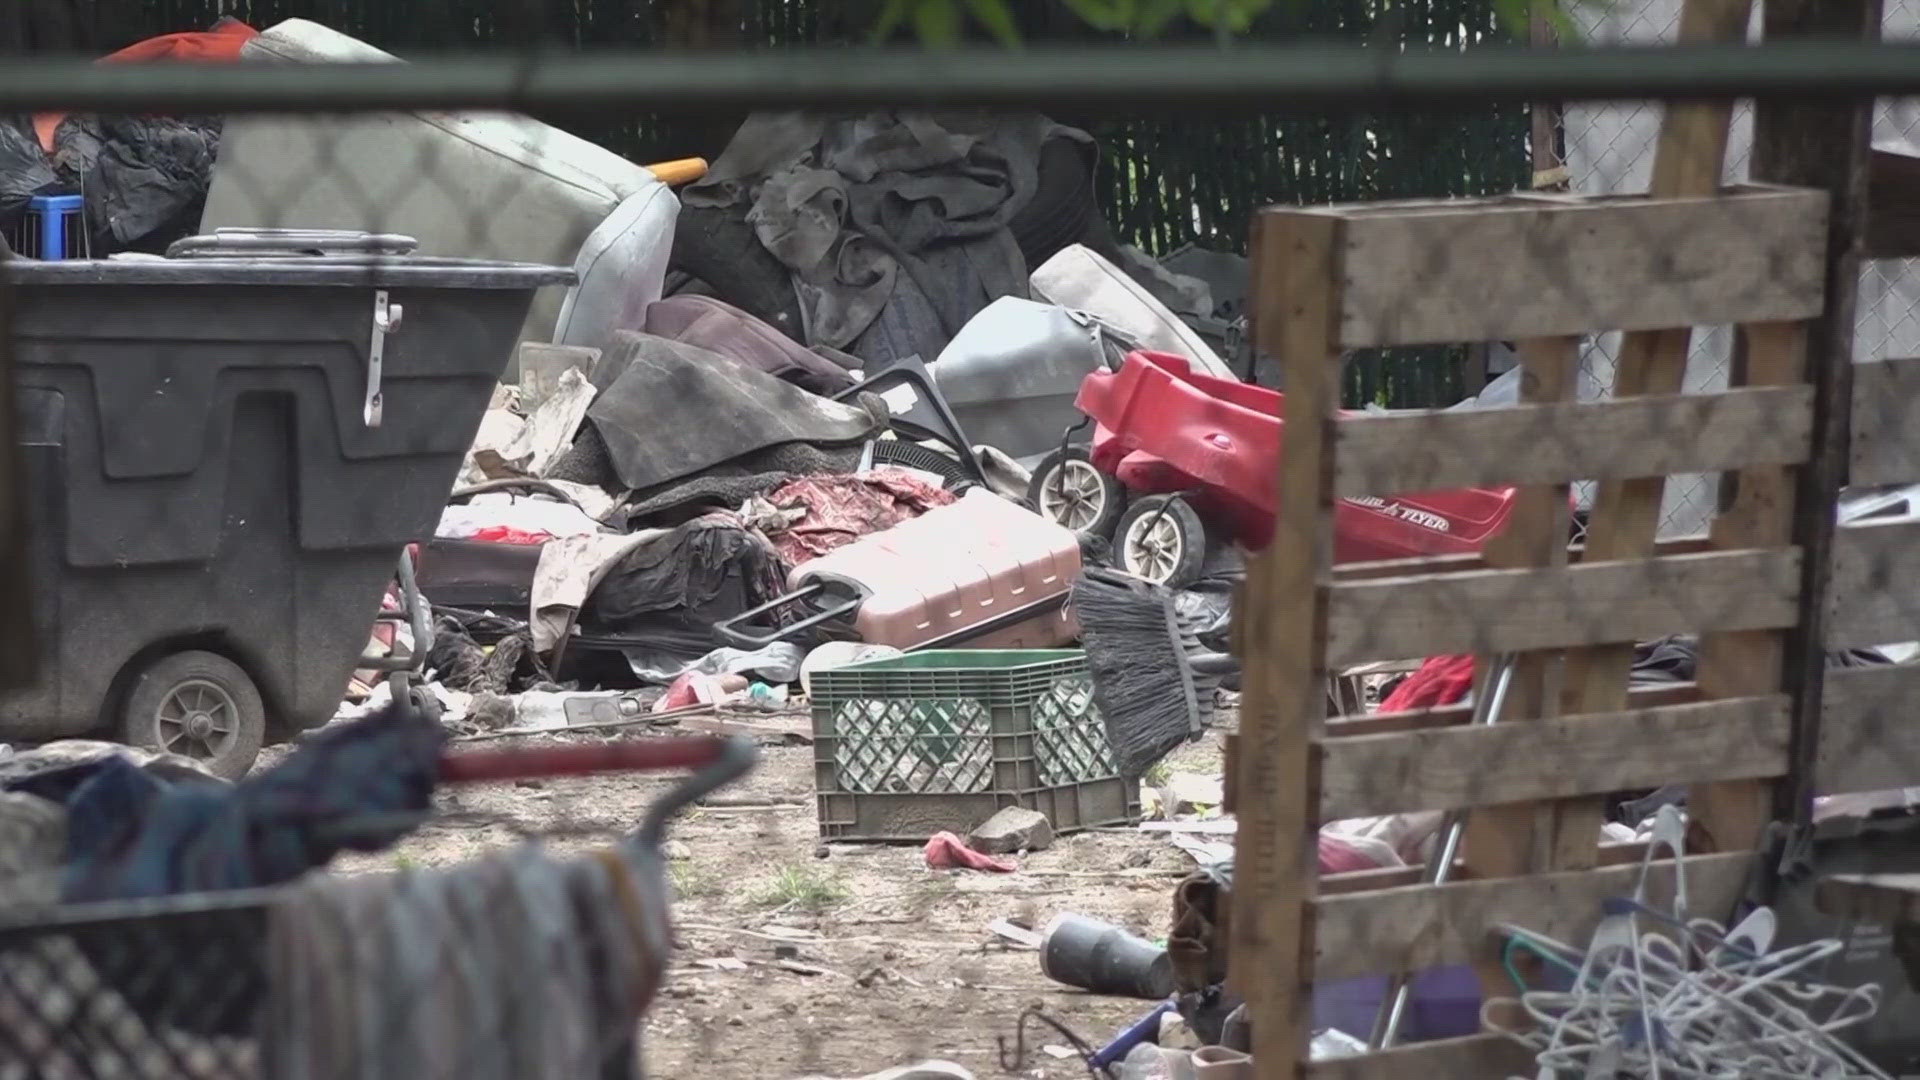 "It's beyond a garbage dump!," neighbors say of the mess.